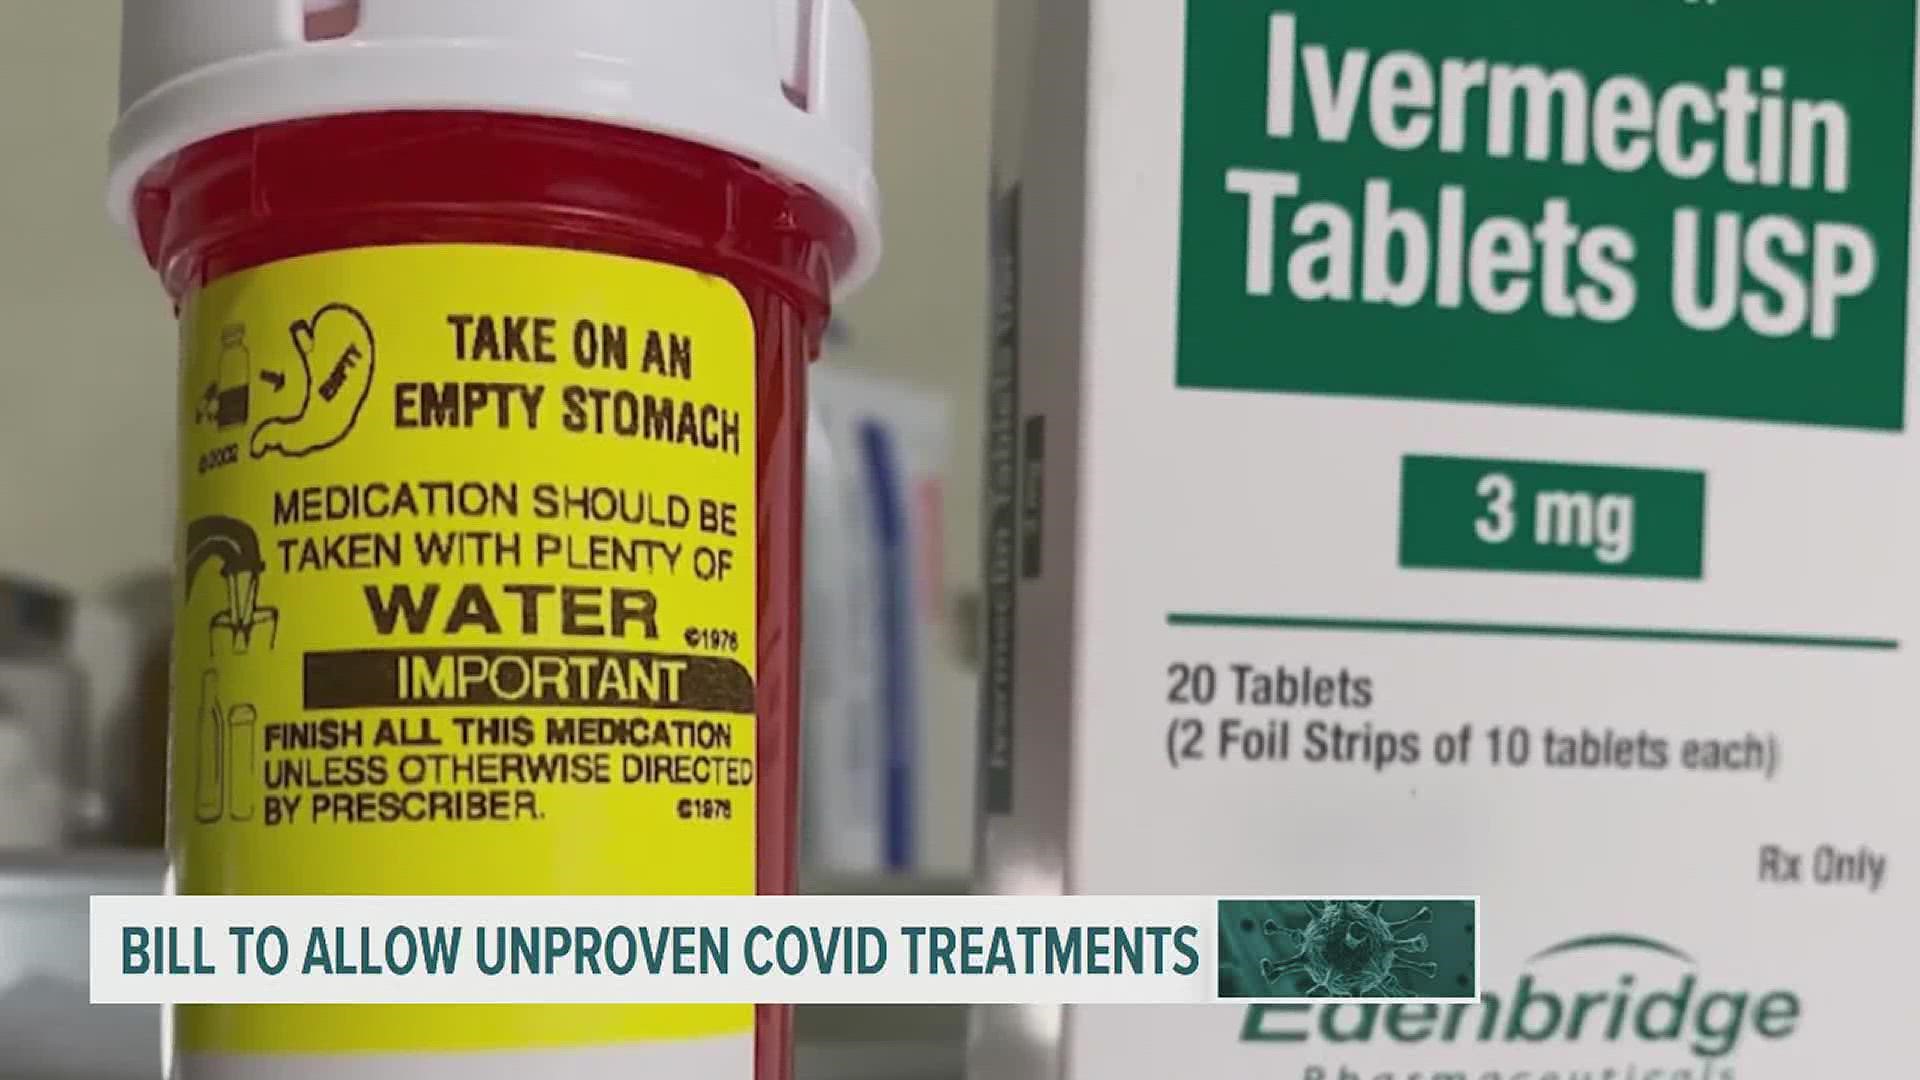 State lawmakers are considering a bill that would allow doctors to prescribe off-label drugs to treat COVID-19 without facing criminal or professional penalties.